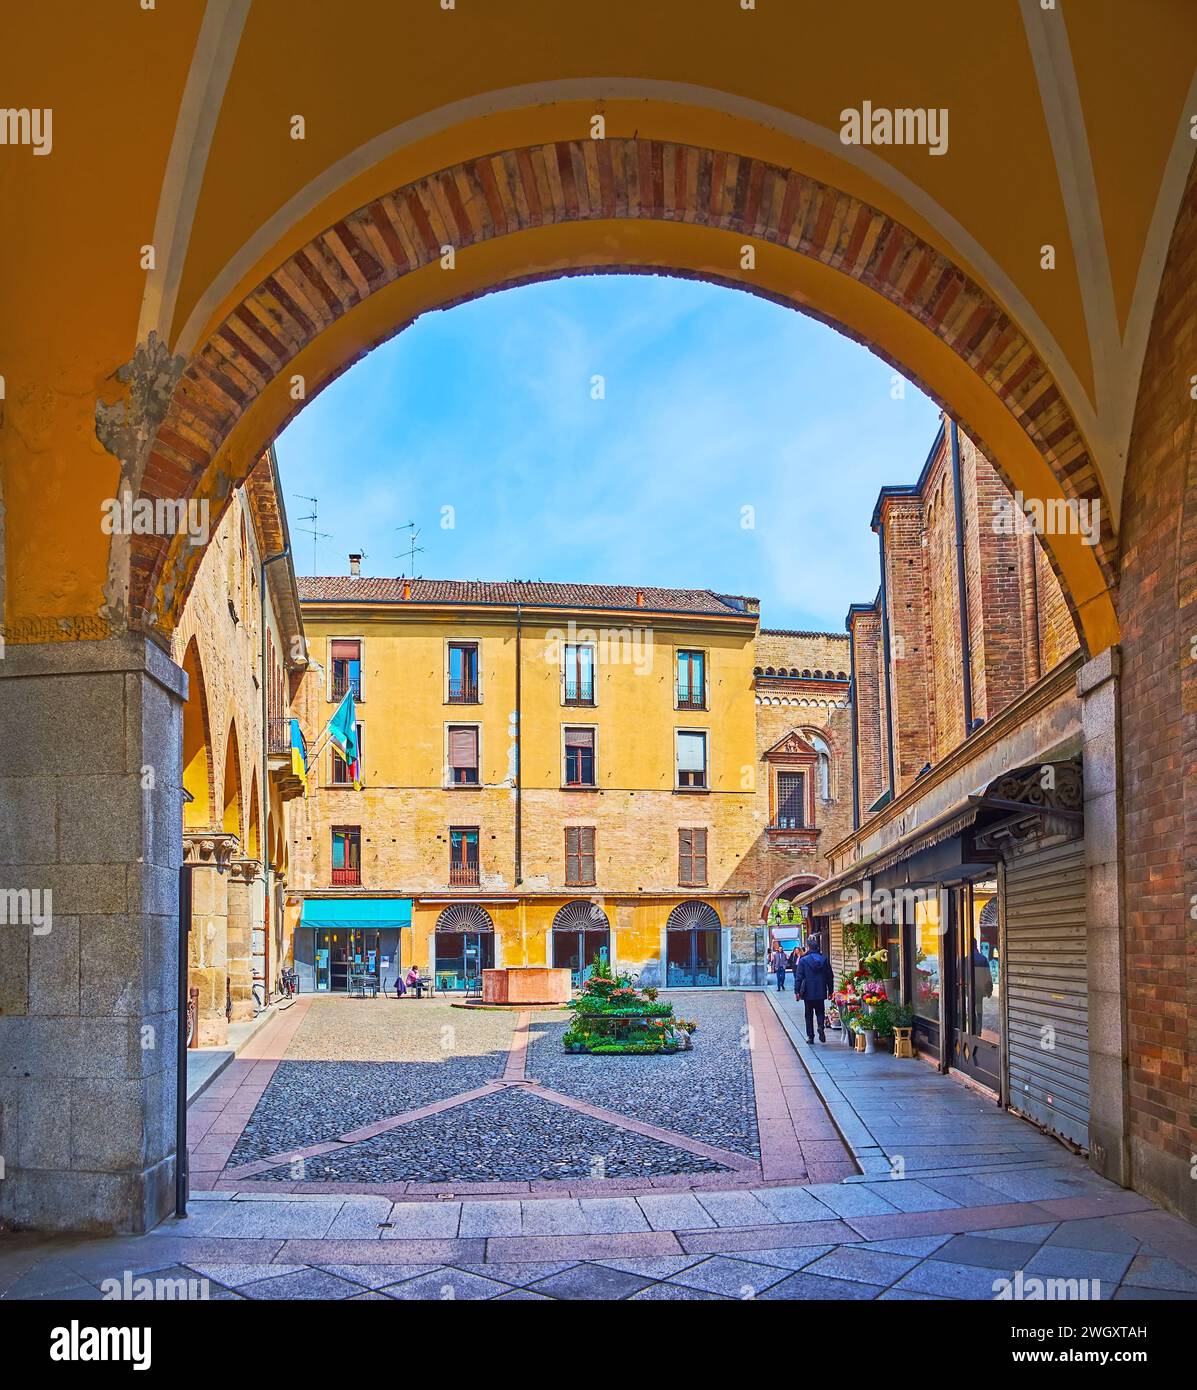 Historic Piazza Broletto in old town of Lodi, Italy Stock Photo